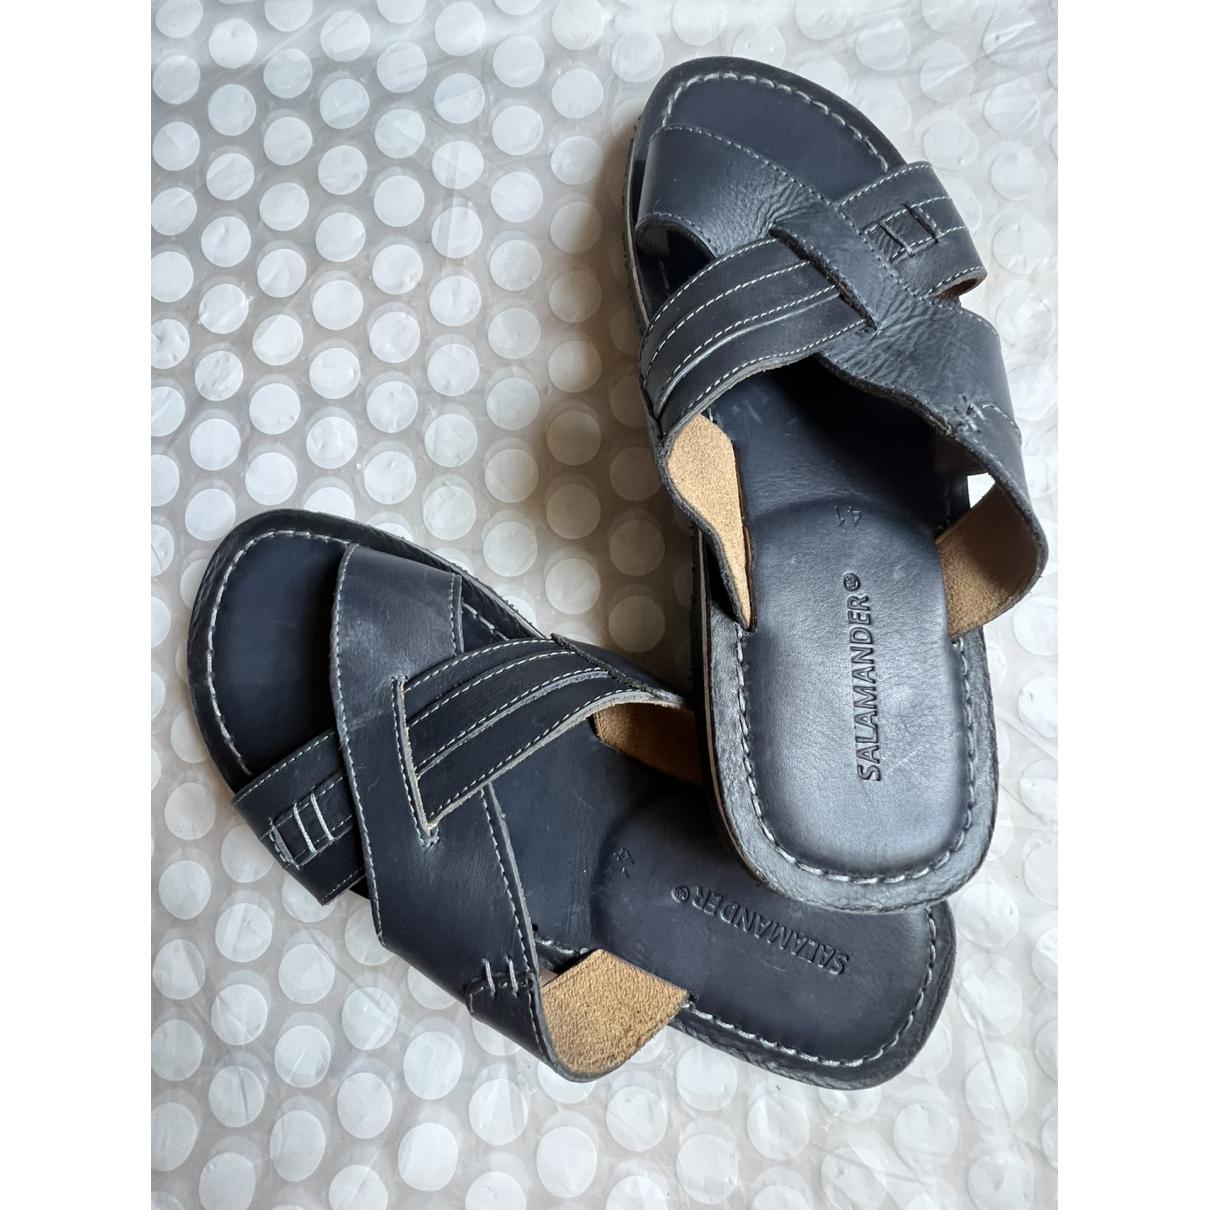 in SALAMANDER 22557086 size 41 - Navy EU Leather sandals Leather